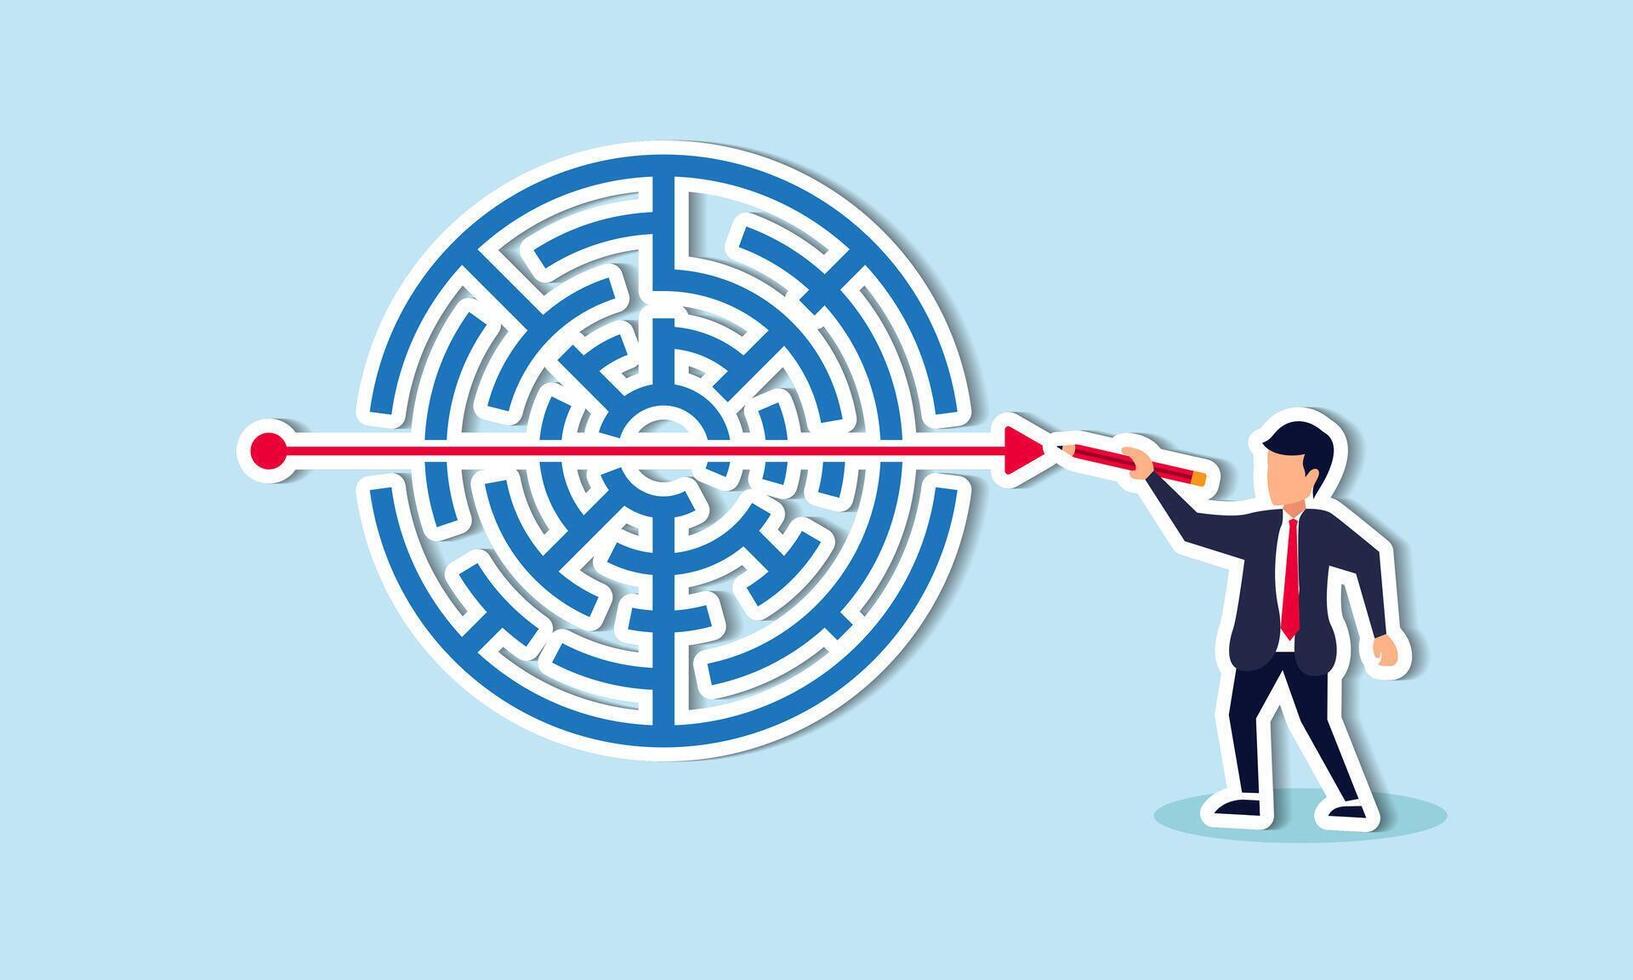 Addressing business challenges entails creativity, imagination, strategizing, and planning for success concept, businessman solve labyrinth or maze puzzle by straight line arrow. vector